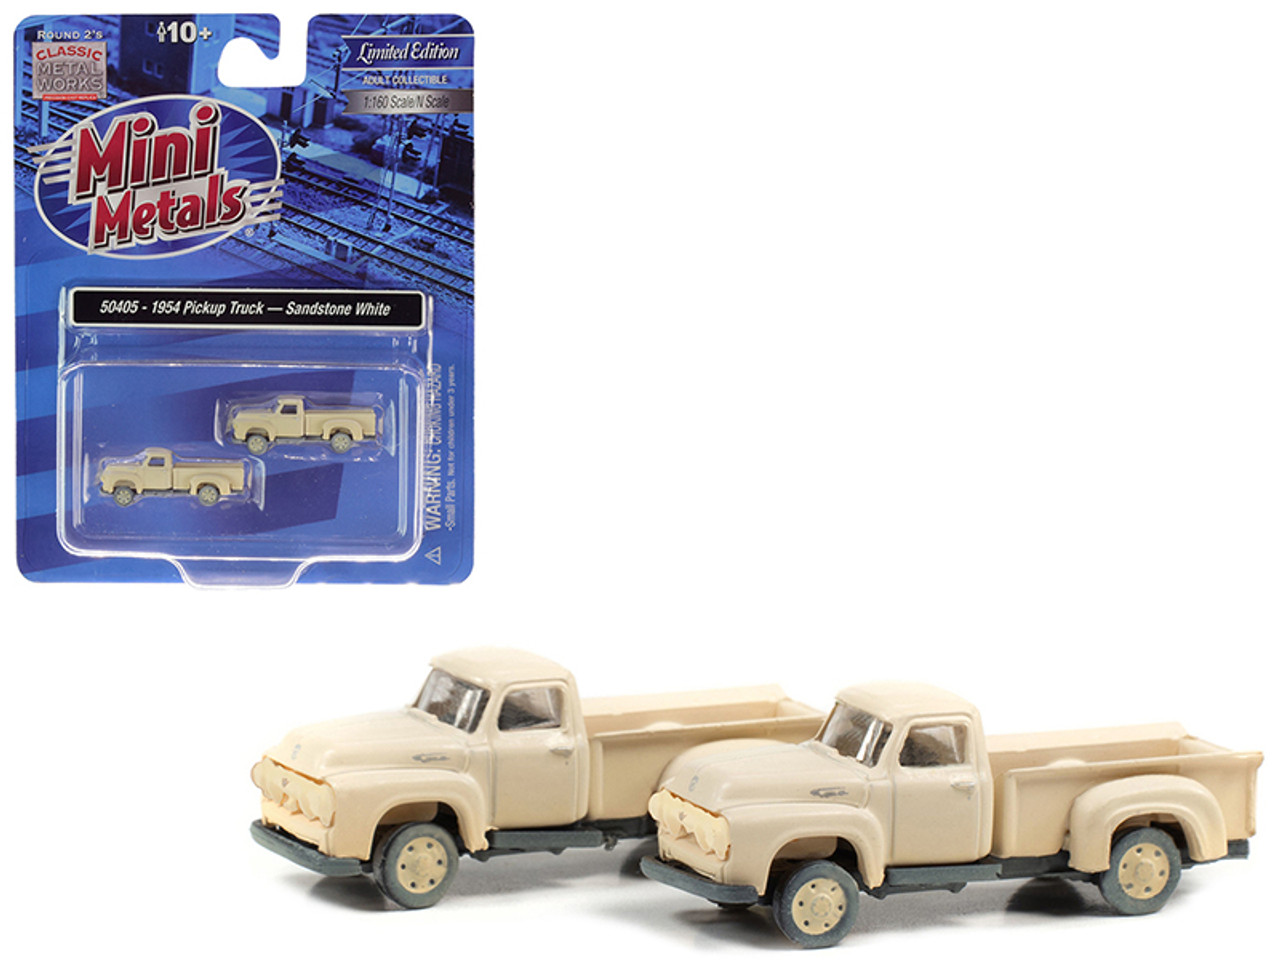 1954 Ford Pickup Trucks Sandstone White (Dirty/Weathered) Set of 2 pieces 1/160 (N) Scale Model Cars by Classic Metal Works